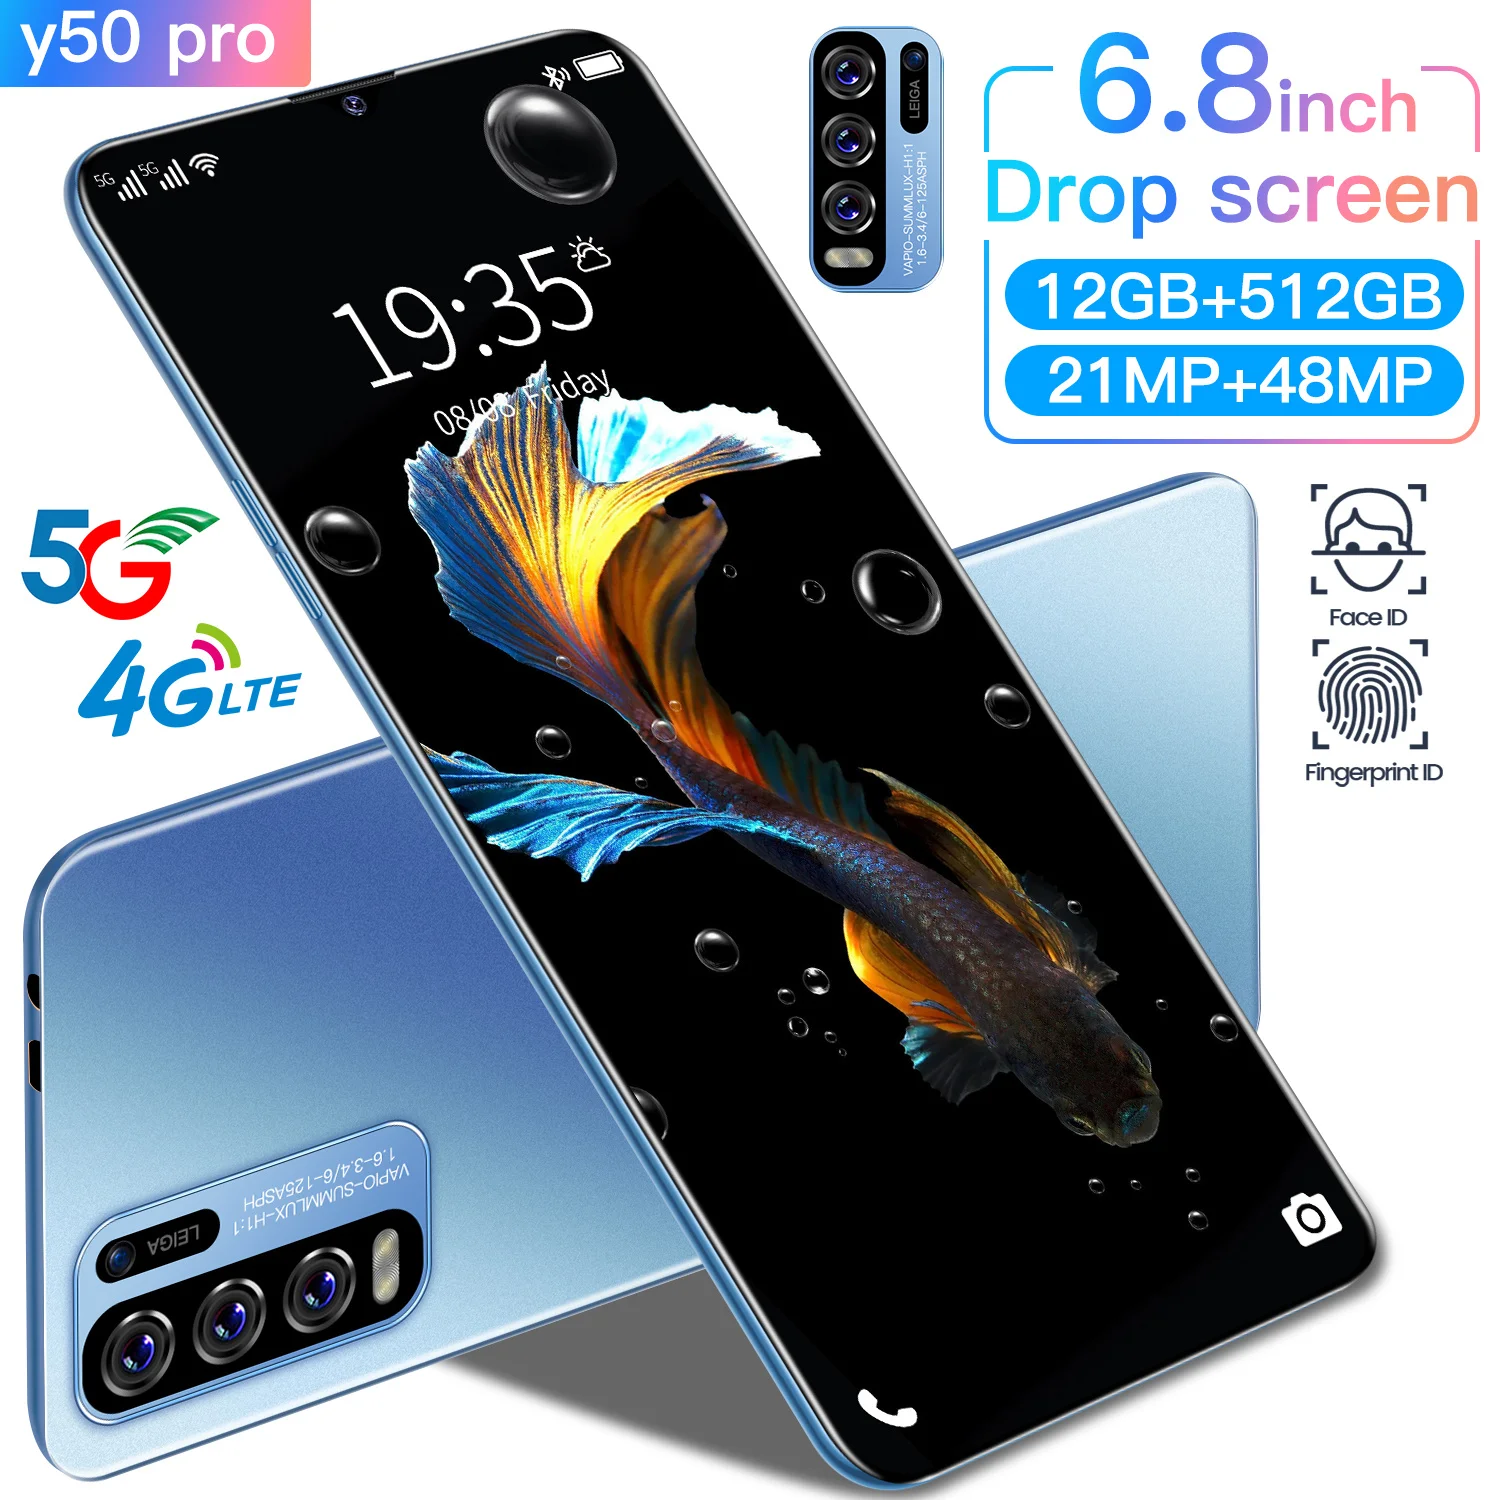 

2021 new Y50 pro mobile phone 6.8-inch water drop screen, u1tra-long standby 4k high-definition smartphone, 12gb ram 512gb rom d